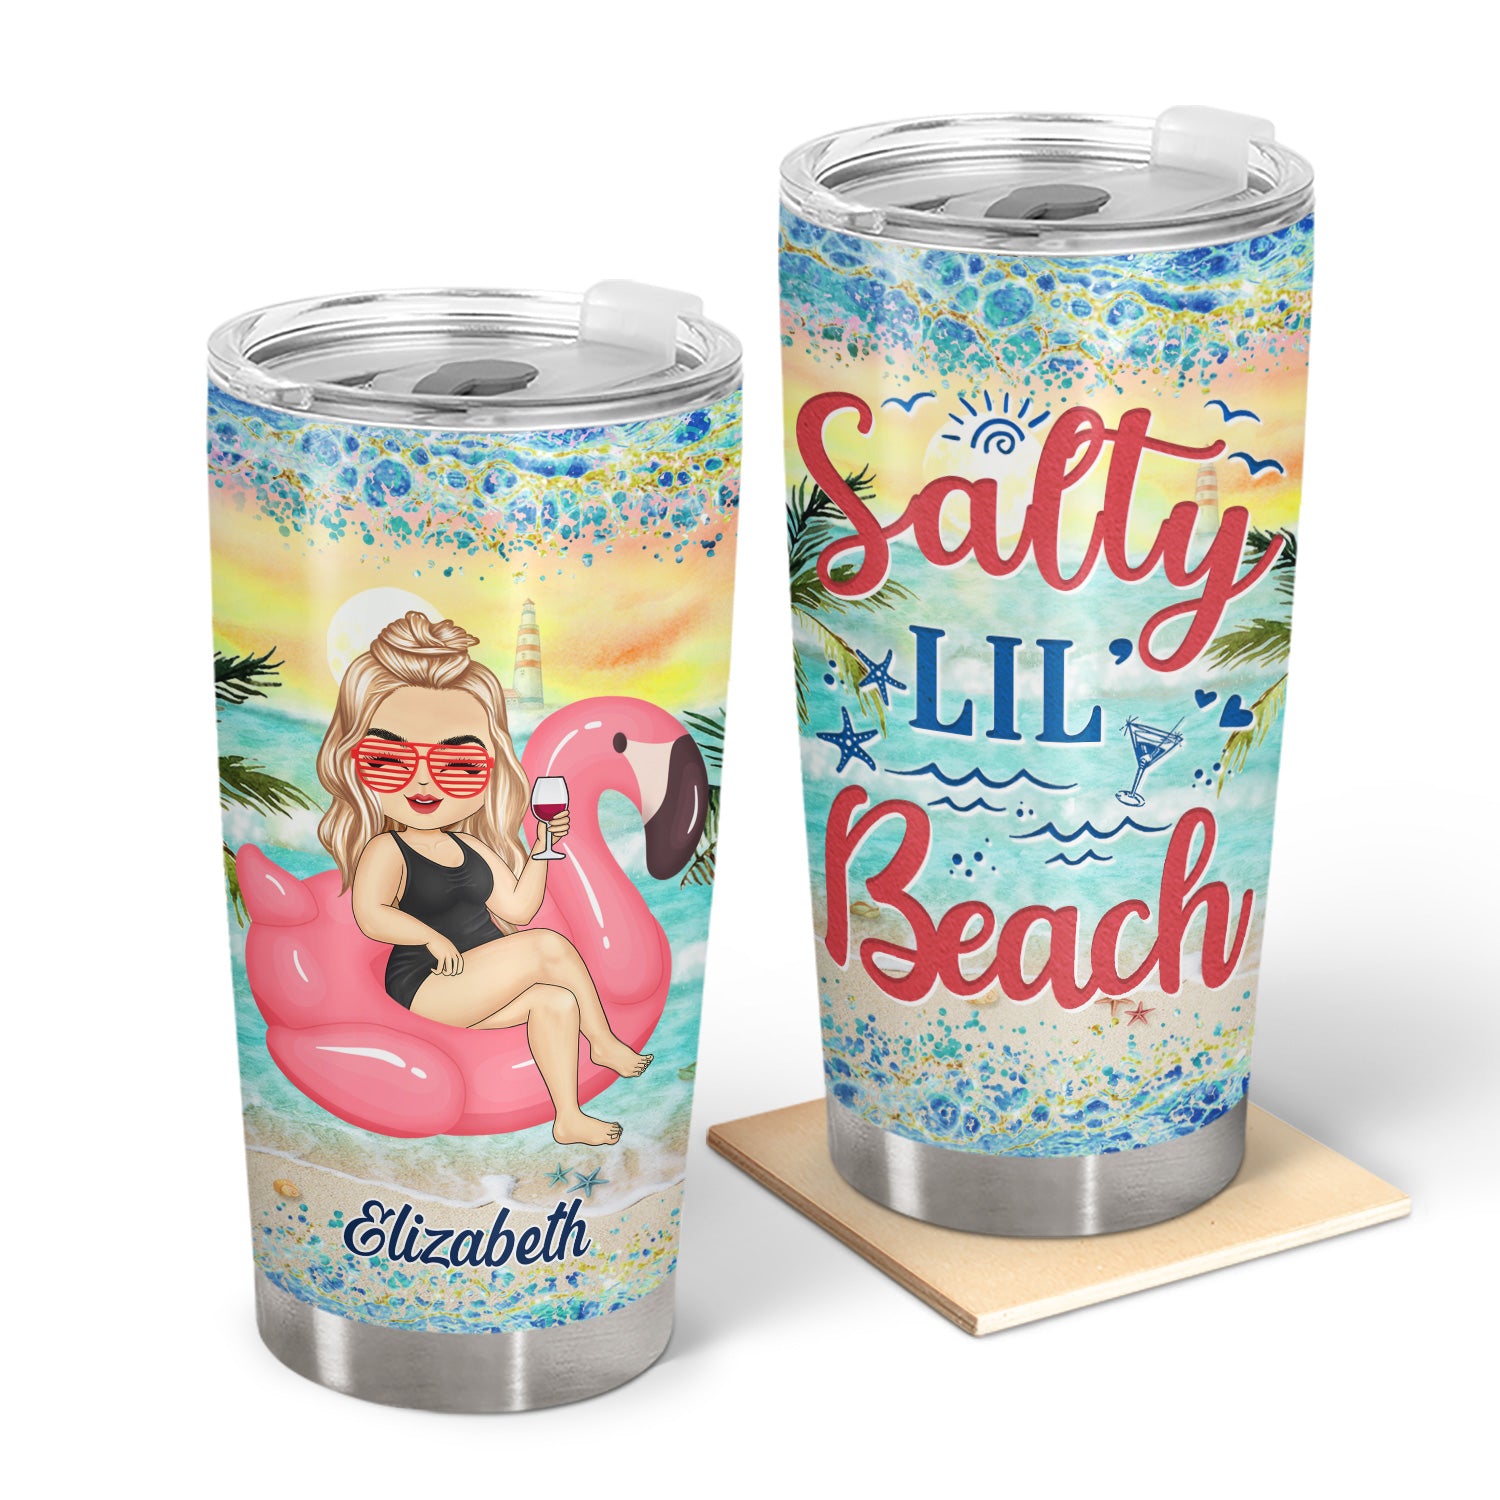 Salty Lil' Beach Tanned And Tipsy Pool Hair Don't Care - Birthday, Anniversary, Travel, Vacation Gift For Woman - Personalized Tumbler